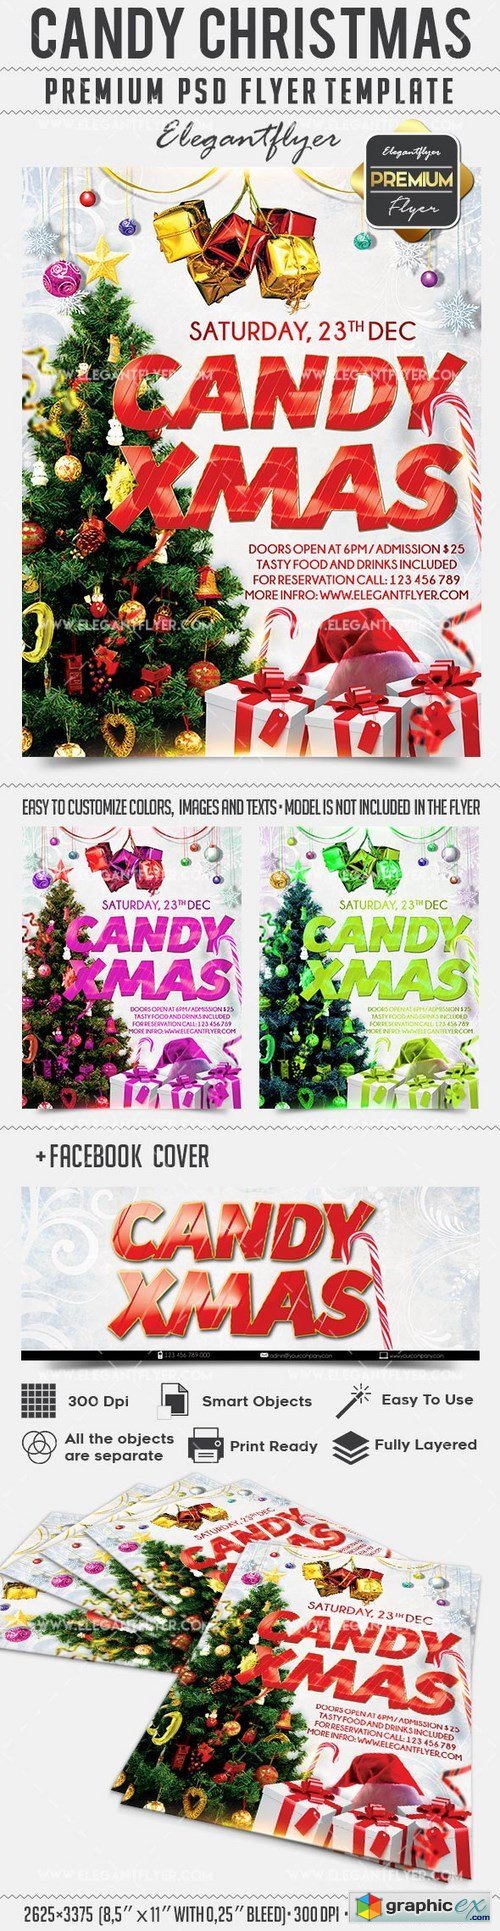 Candy Christmas  Flyer PSD Template + Facebook Cover